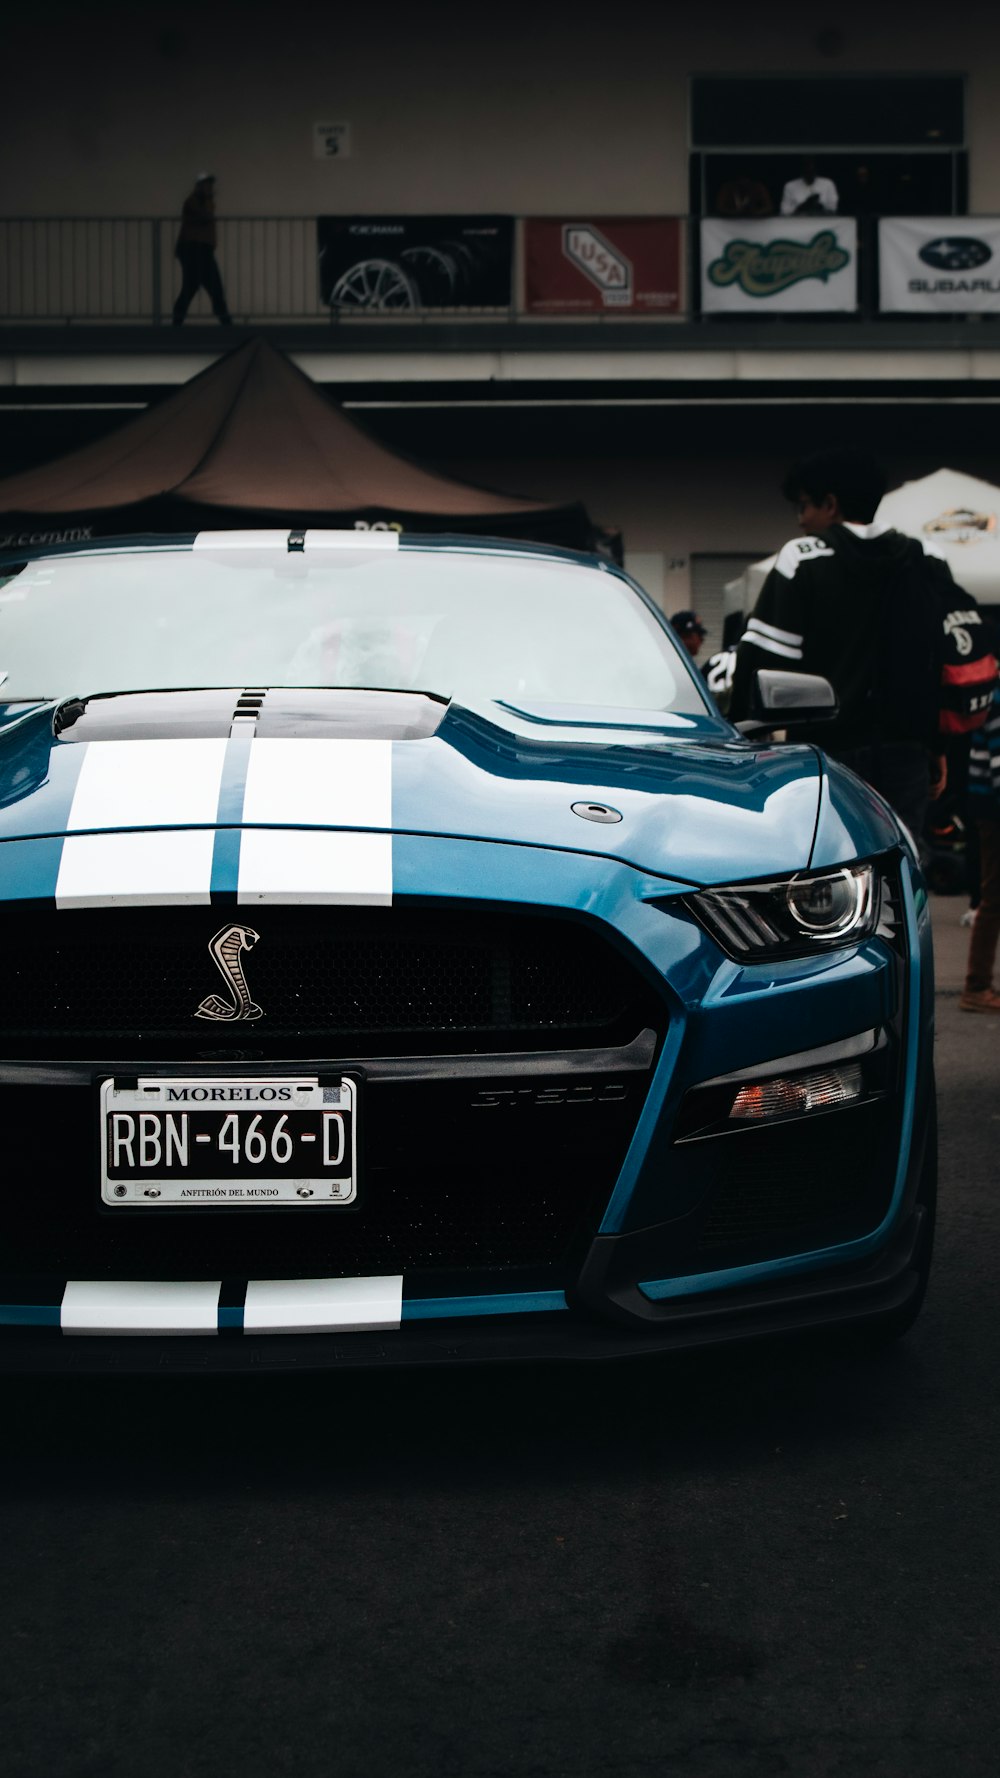 a blue and white mustang parked in a garage